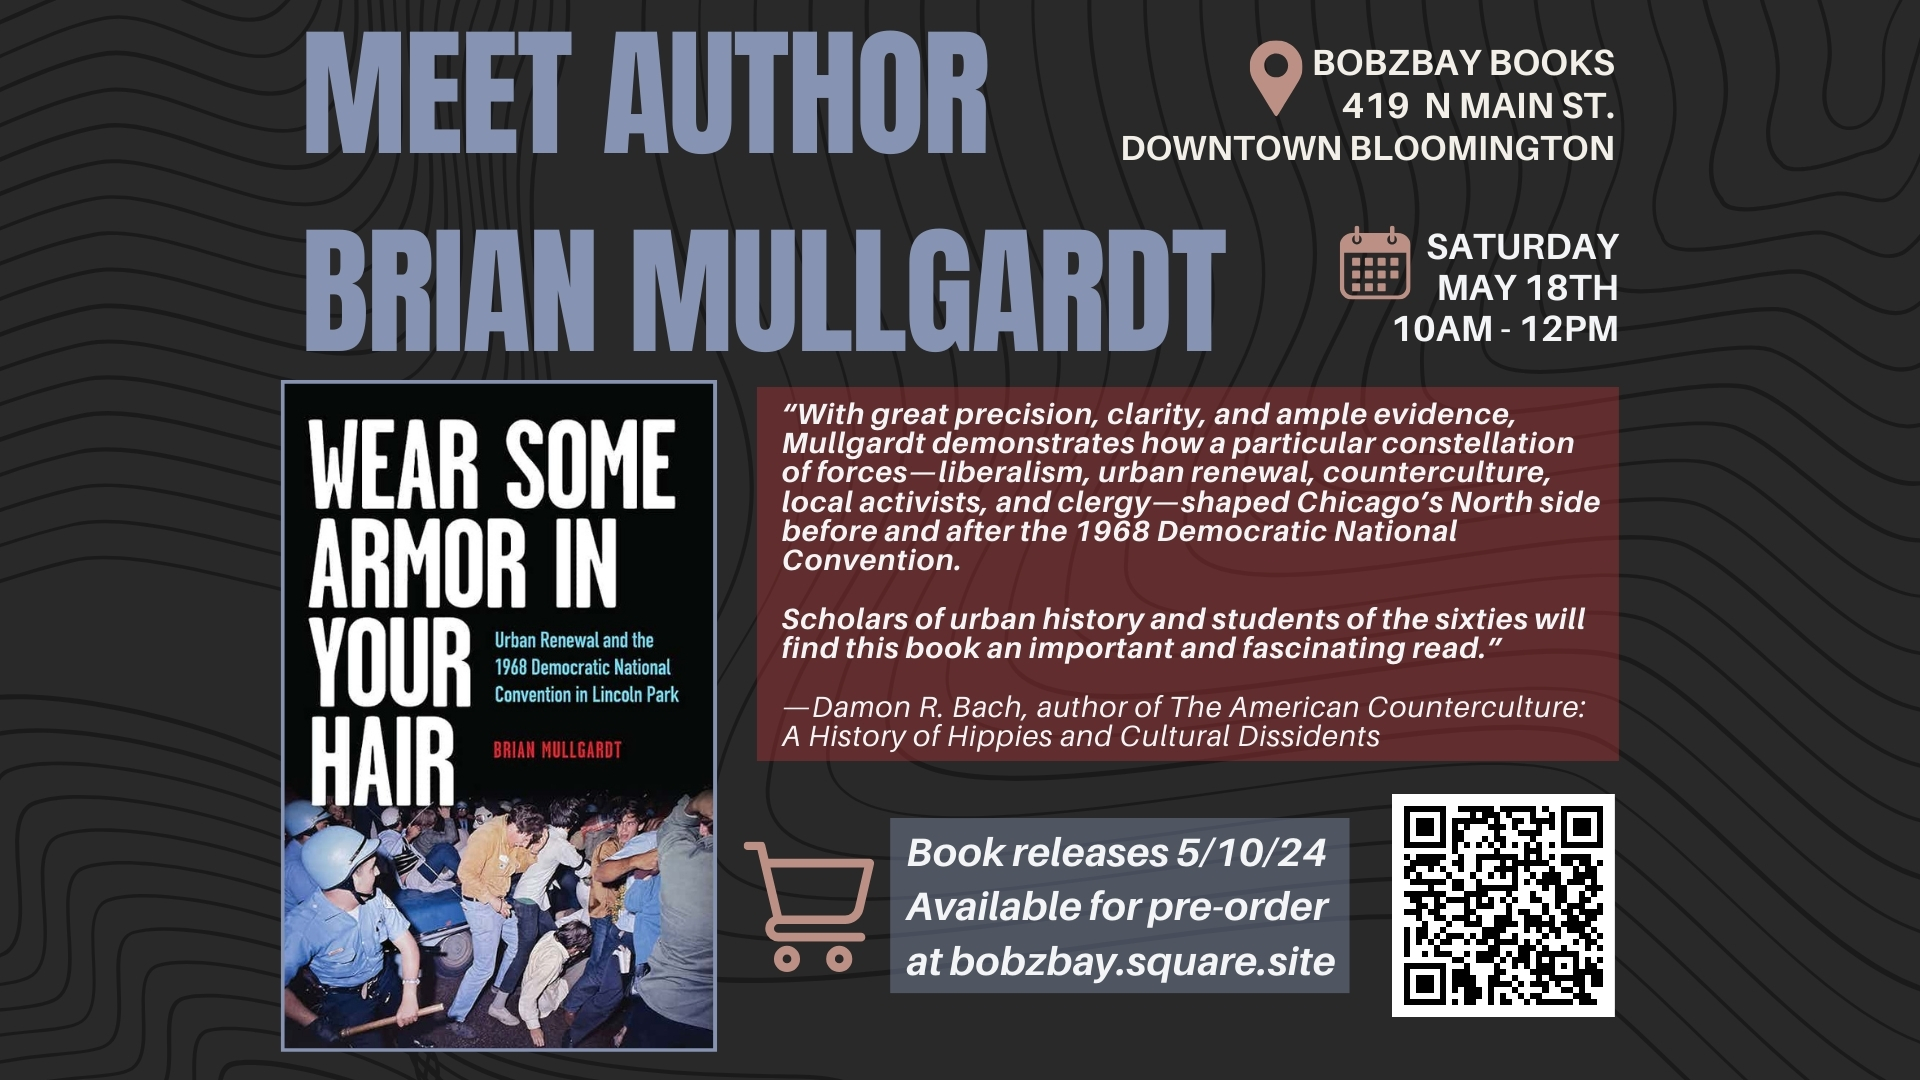 Book Signing with Non-Fiction Author Brian Mullgardt at Bobzbay Books